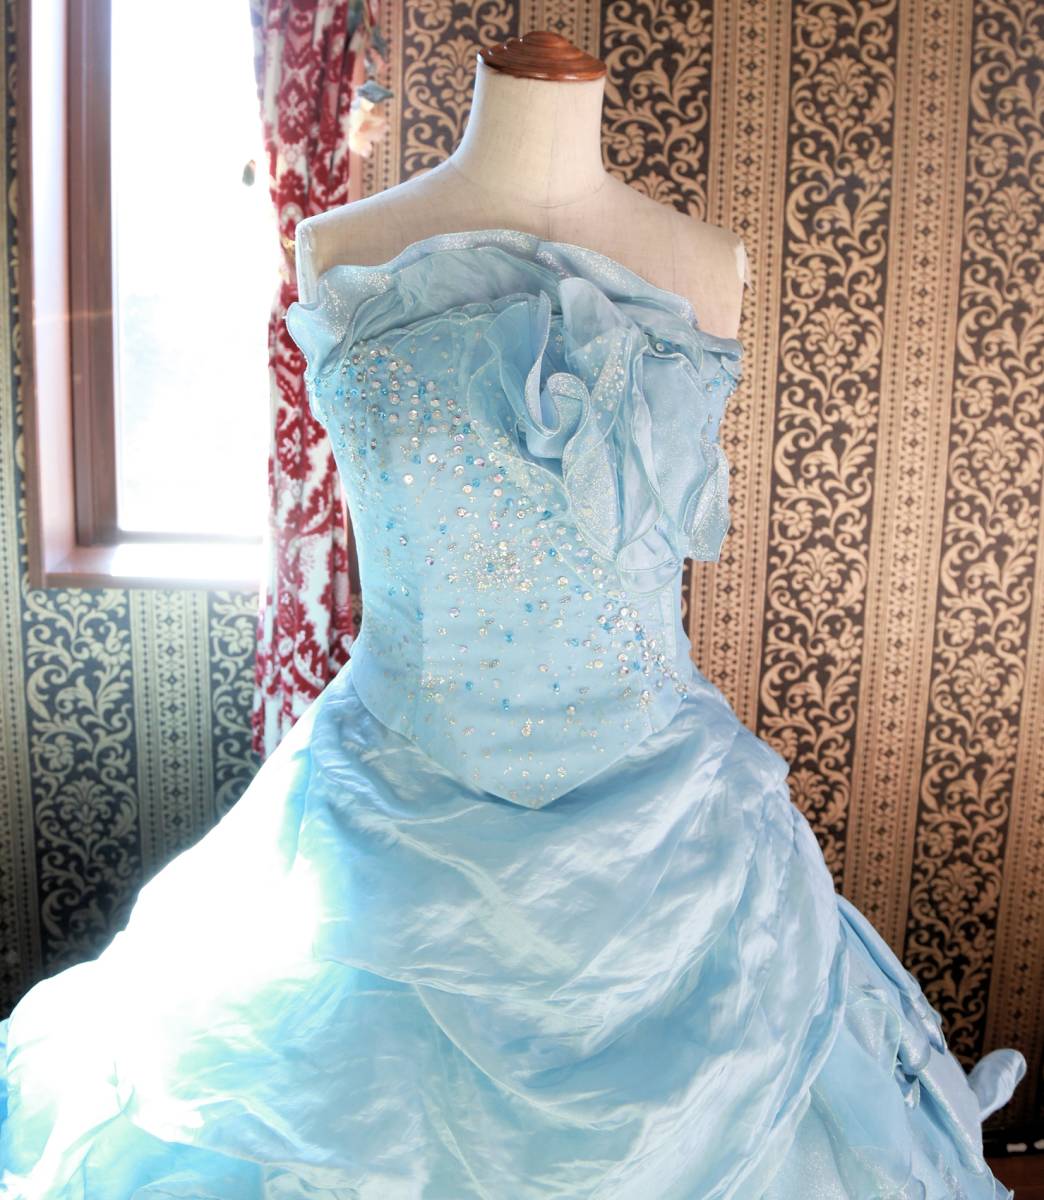 LANCETTY high class wedding dress 7 number 8 number S~M size light blue color dress made in Japan 